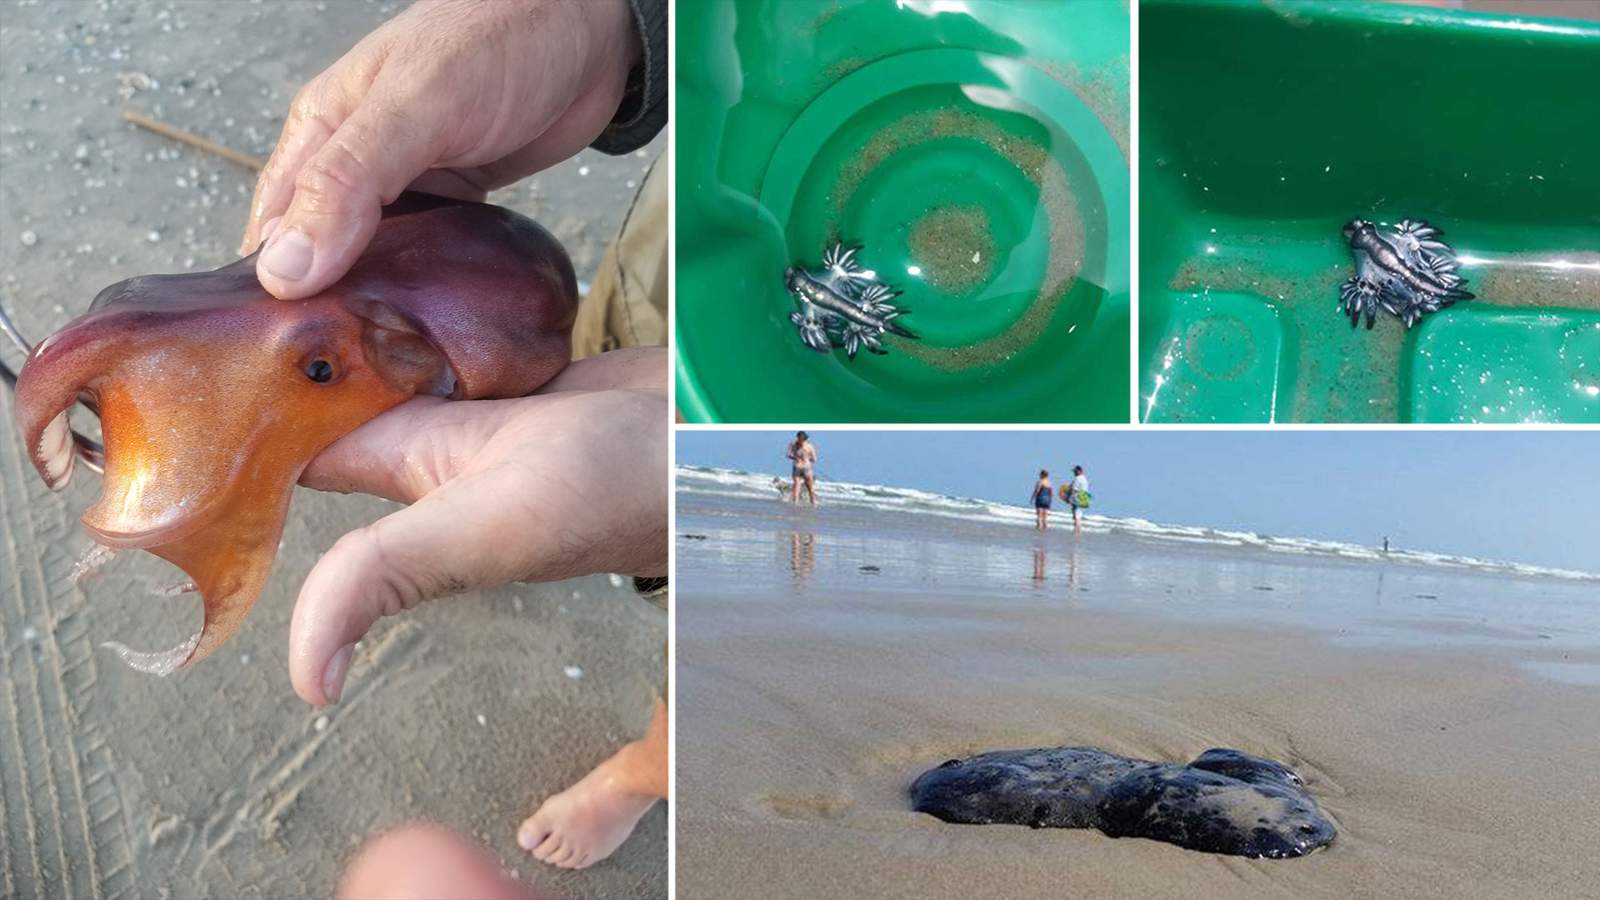 Blue dragons aren’t the only odd things spotted at Texas beaches in the last year